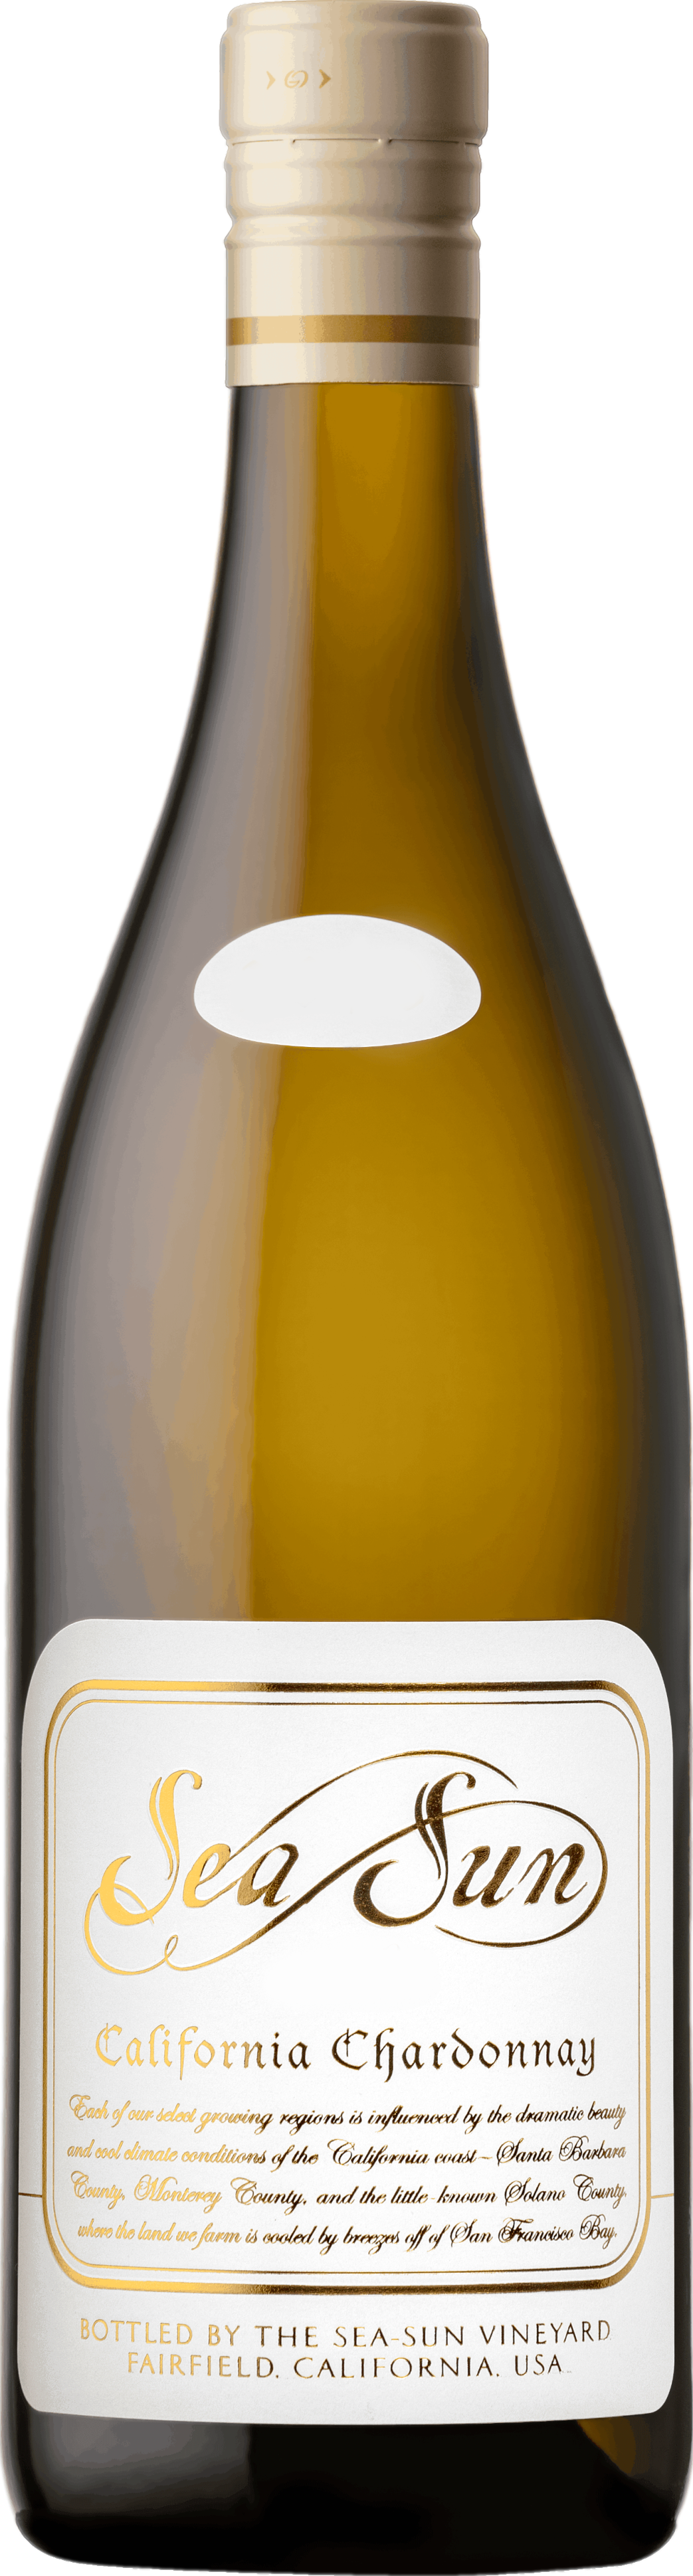 Product image of Sea Sun by Caymus Chardonnay 2021 from 8wines